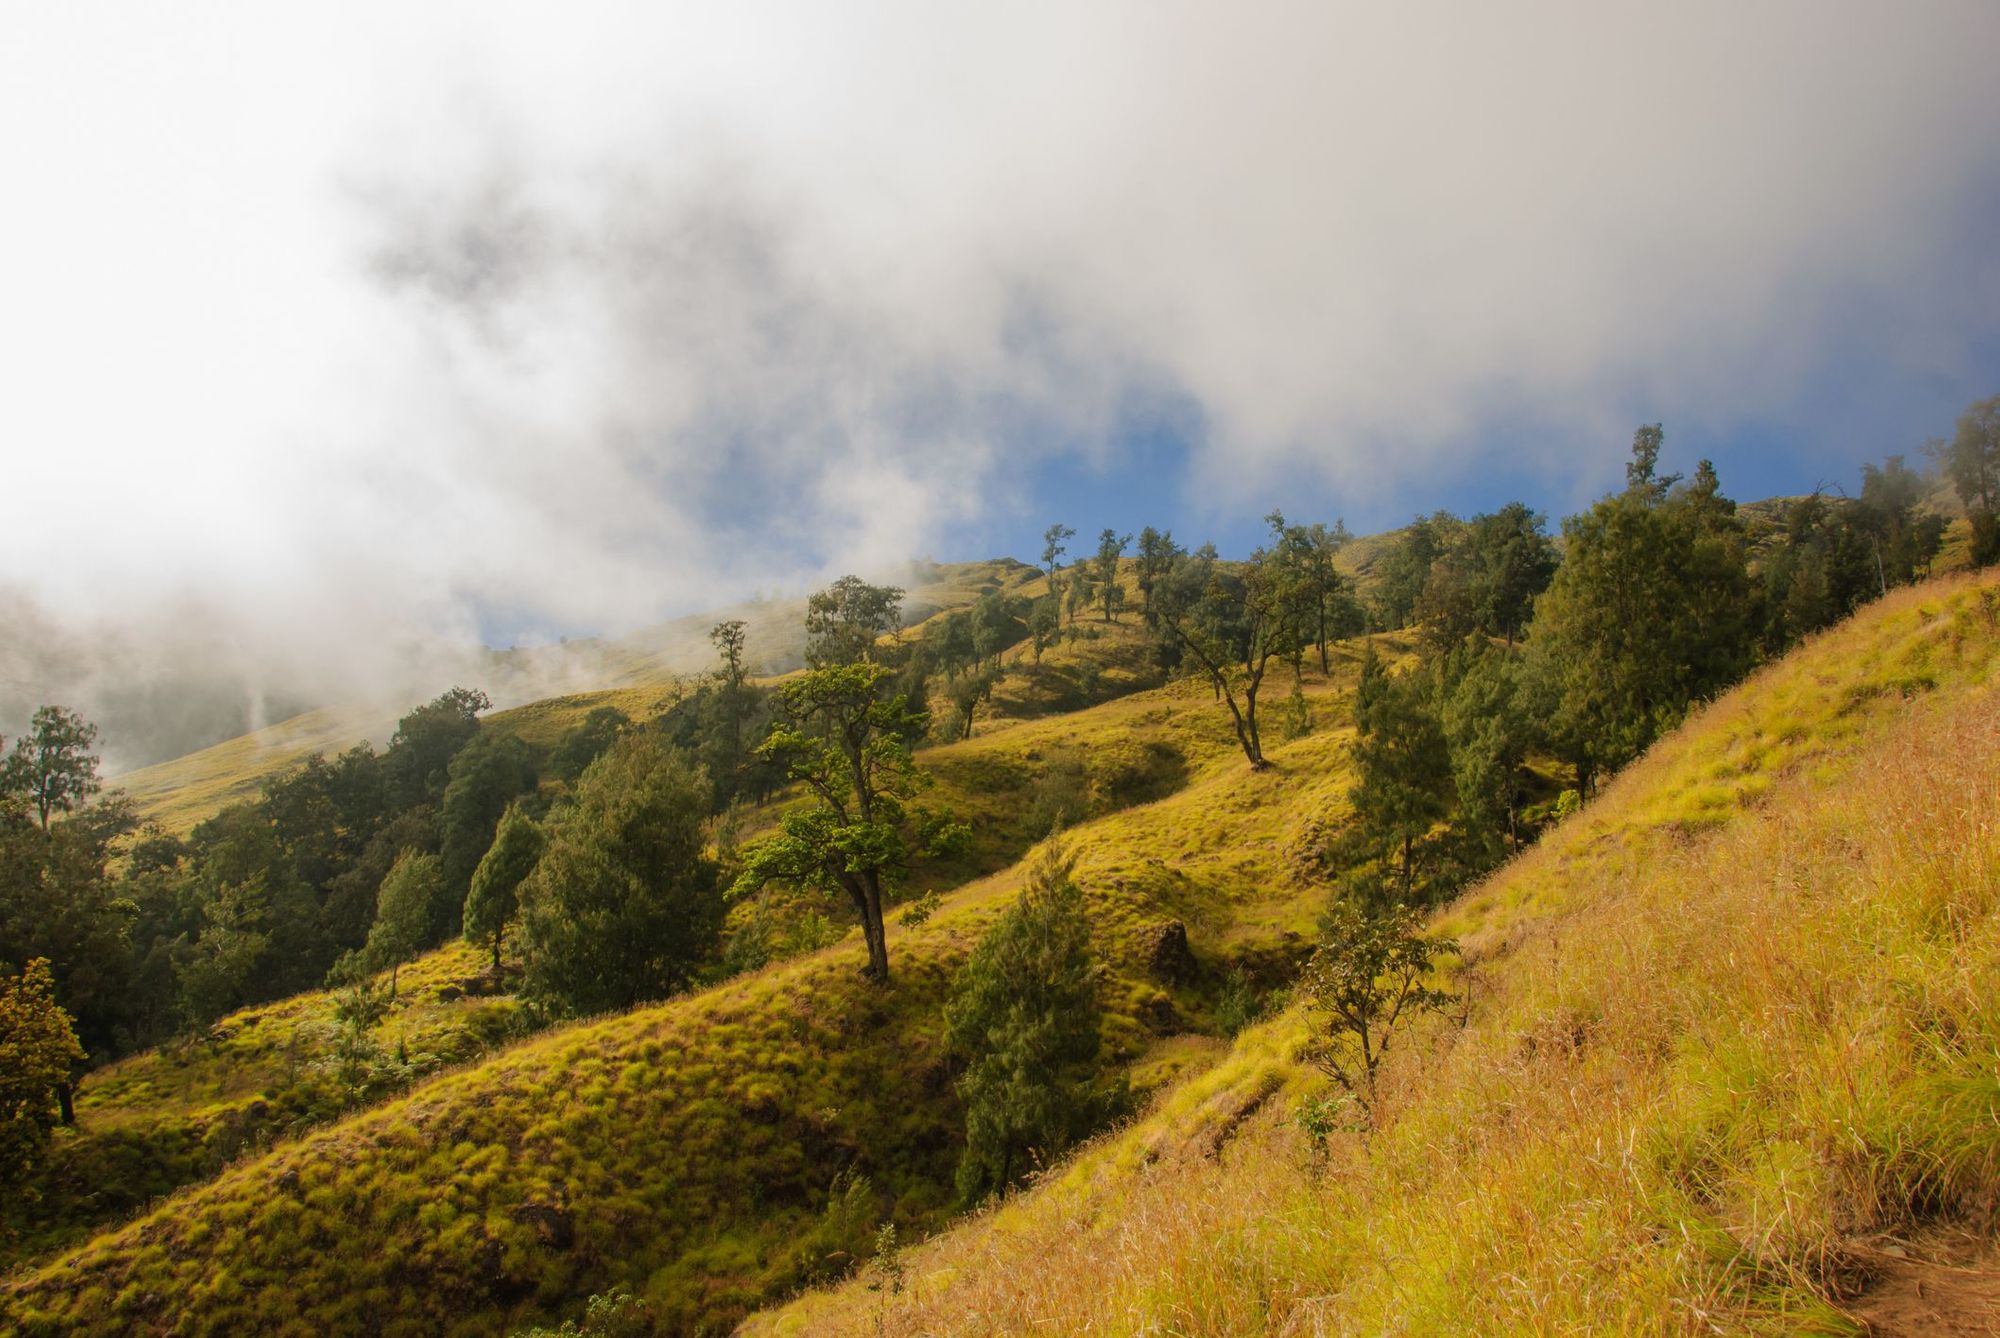 The savannah on the lower slopes of Mount Rinjani, Lombok. Photo: Getty.